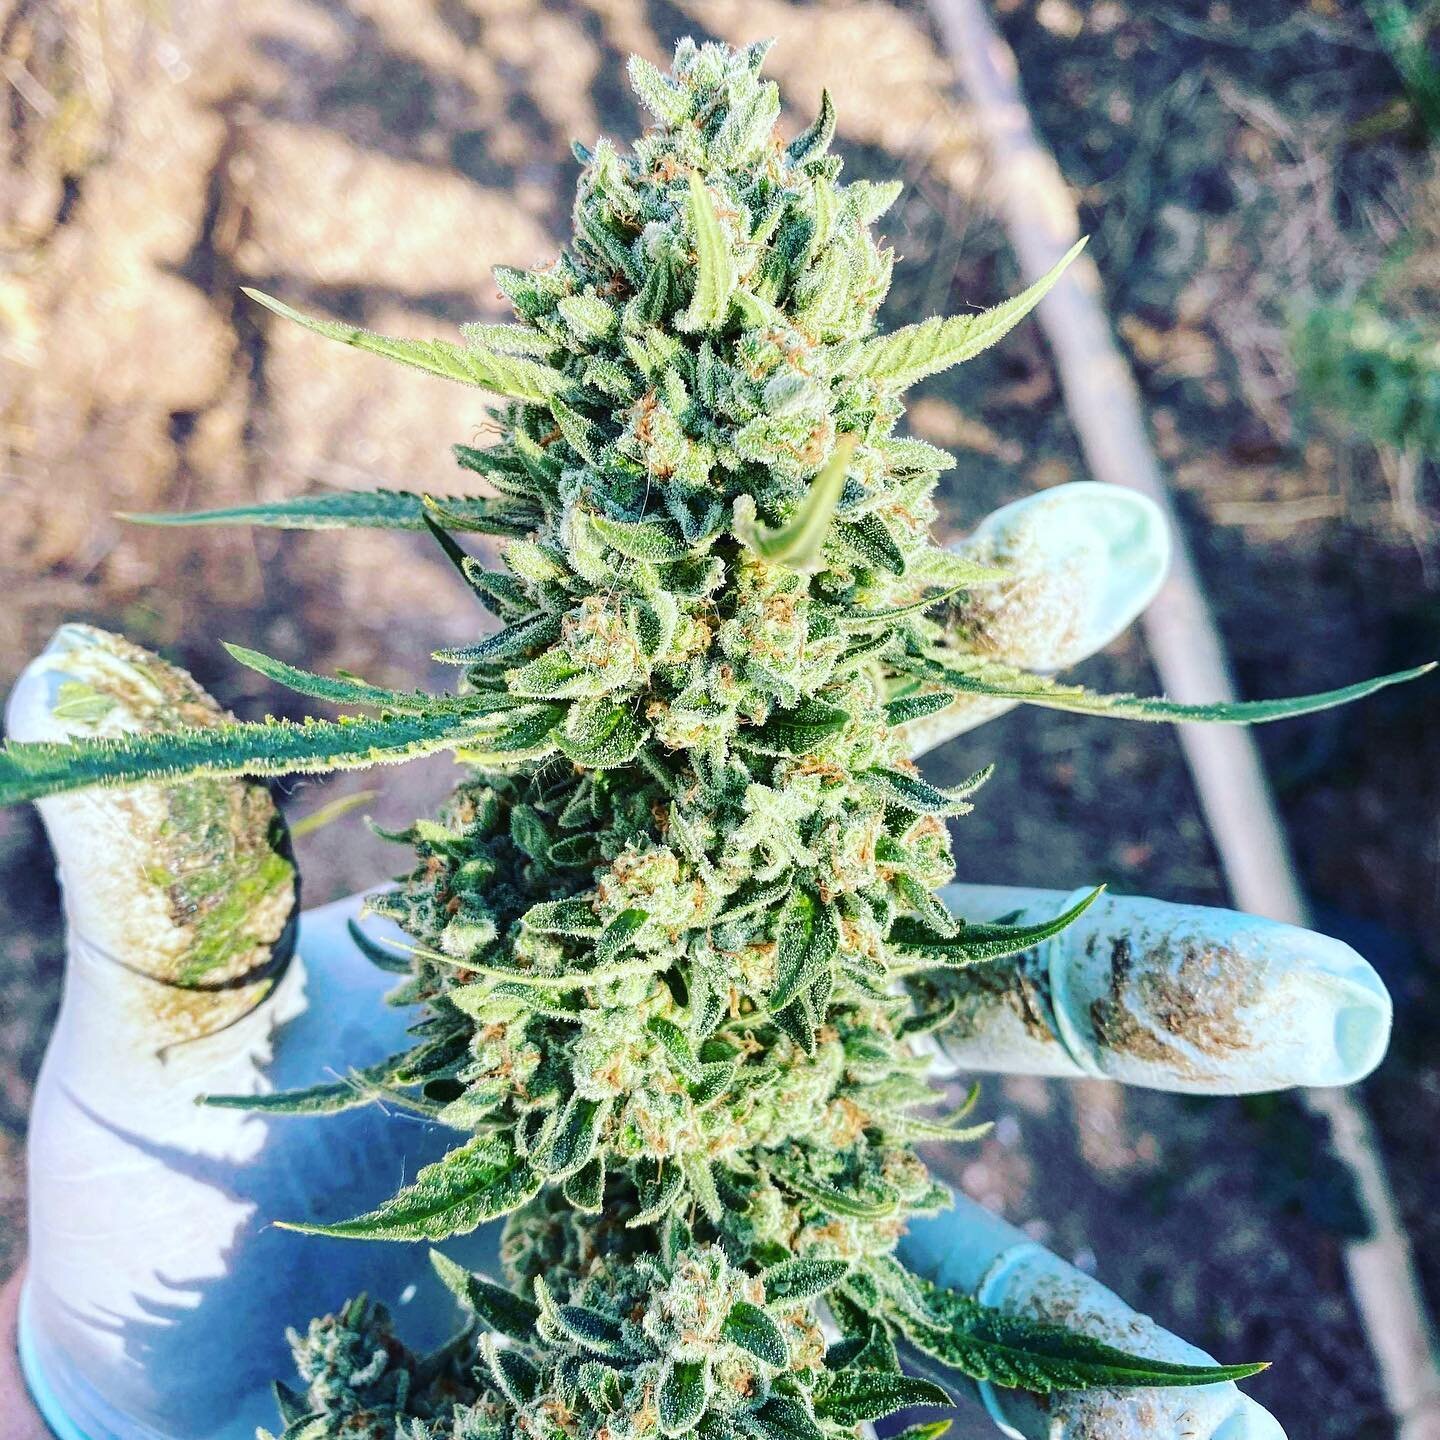 Harvest time! Pictured is our Oscillator OG bred by @curious_cultivar with name inspiration help from @sts9. She&rsquo;s a beautiful cultivar with thick colas and a pleasant skunky fuel nose. This will be the first release of this strain to Californi